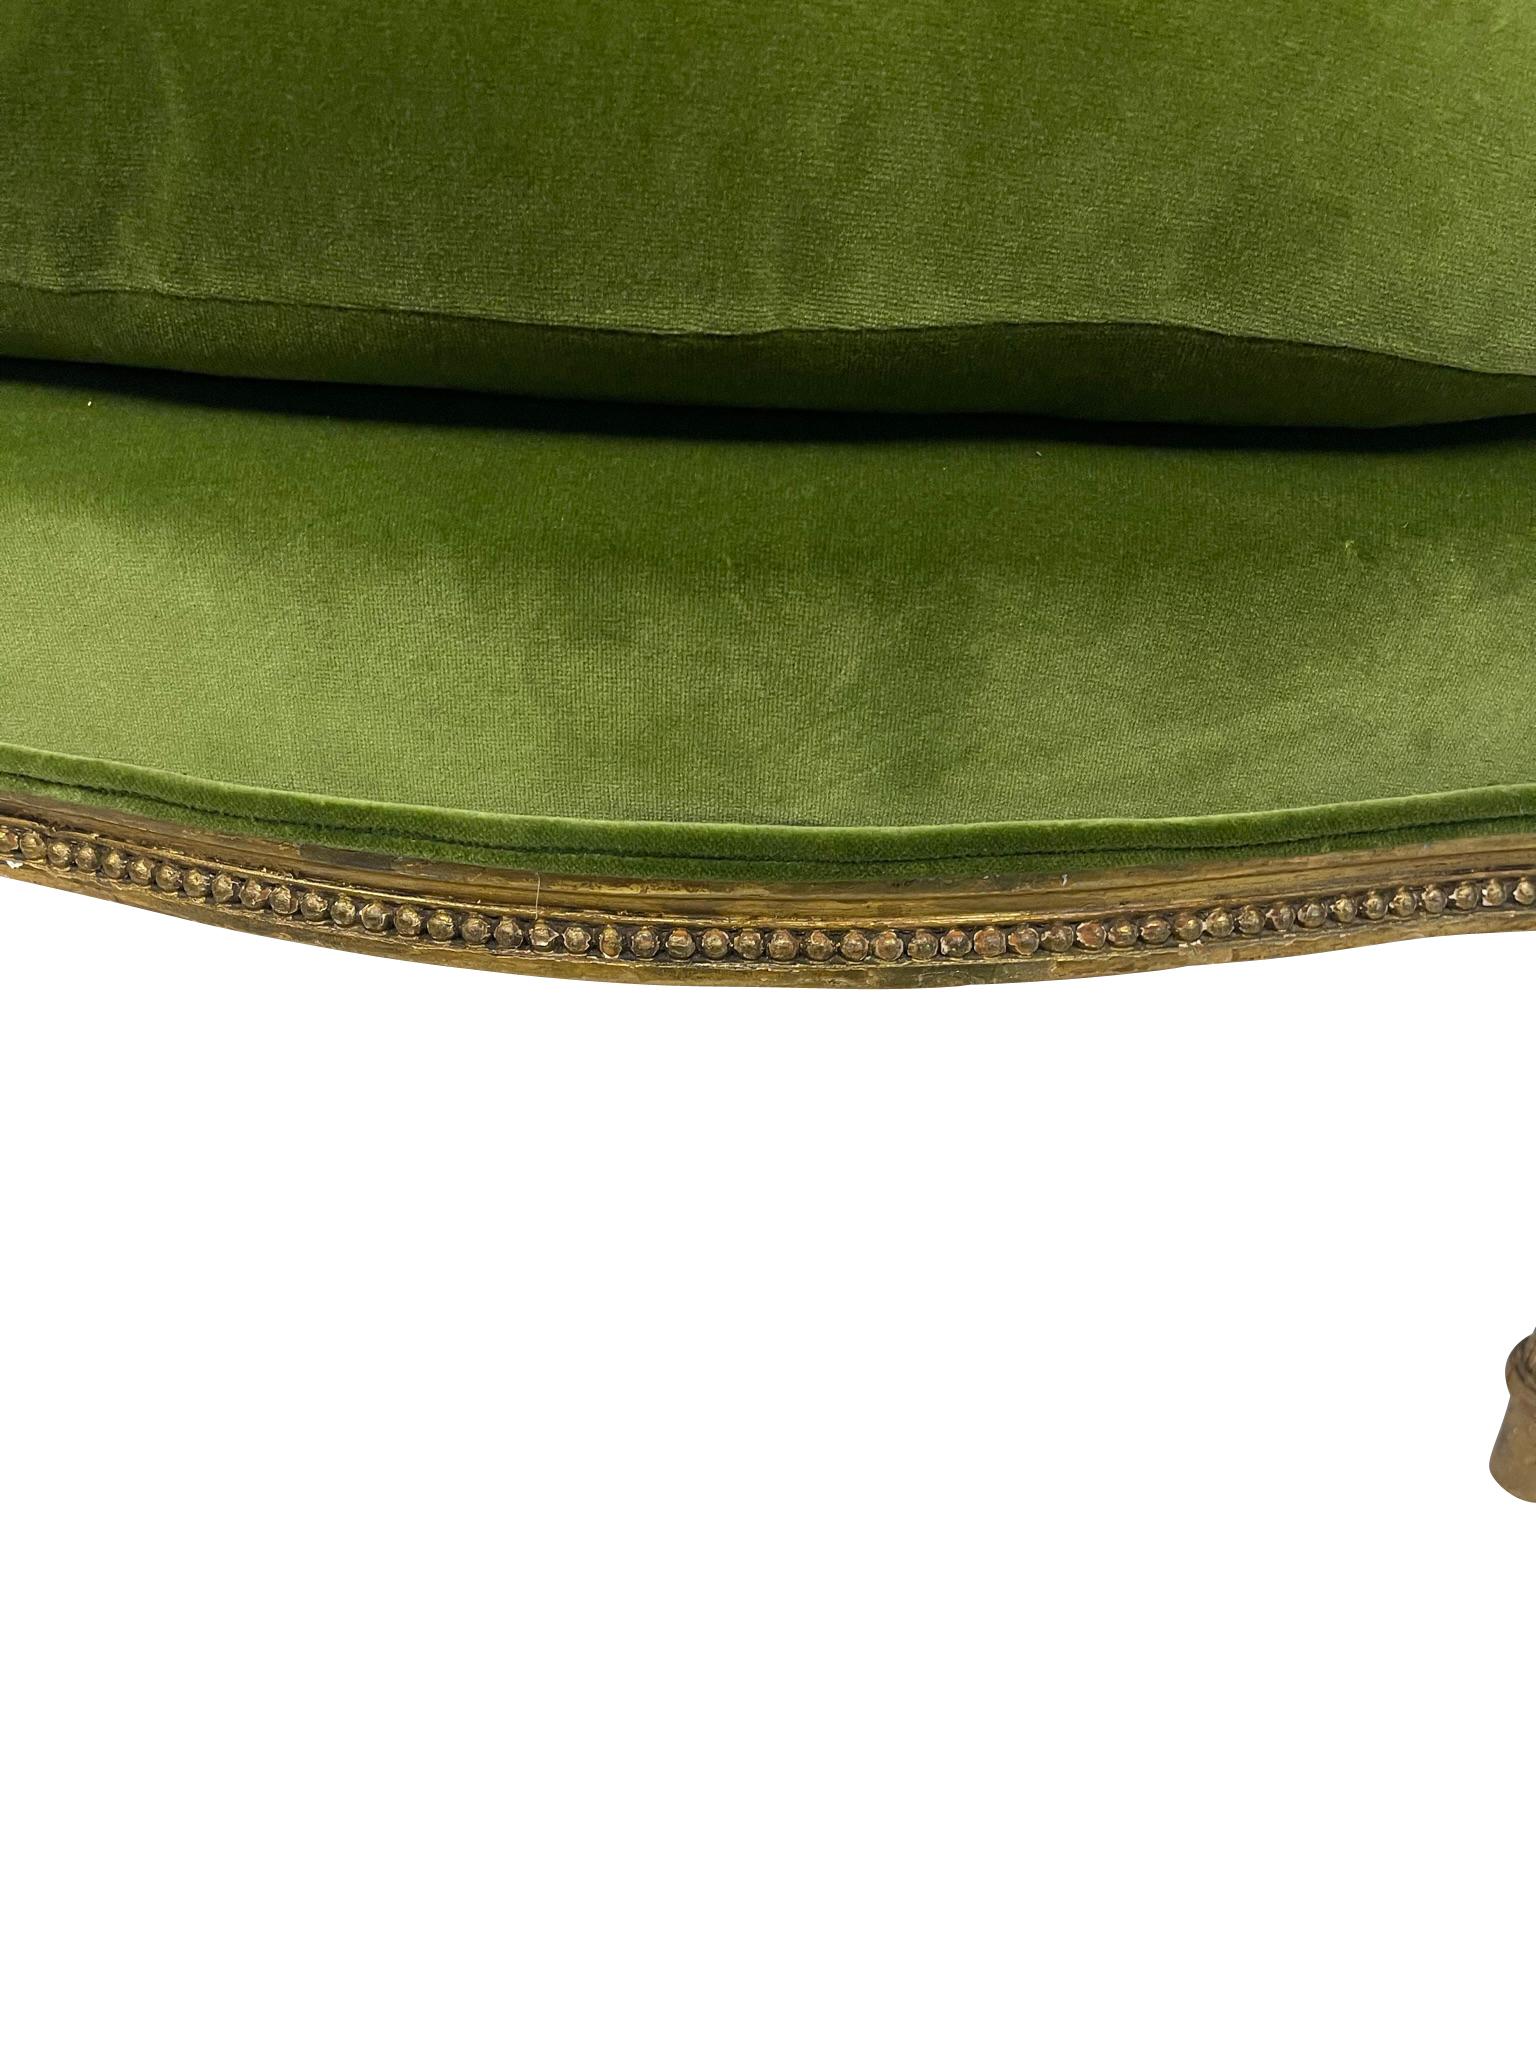 Louis XVI Style Giltwood Carved Bergere/ Arnchair with Green Velvet In Good Condition For Sale In Essex, MA